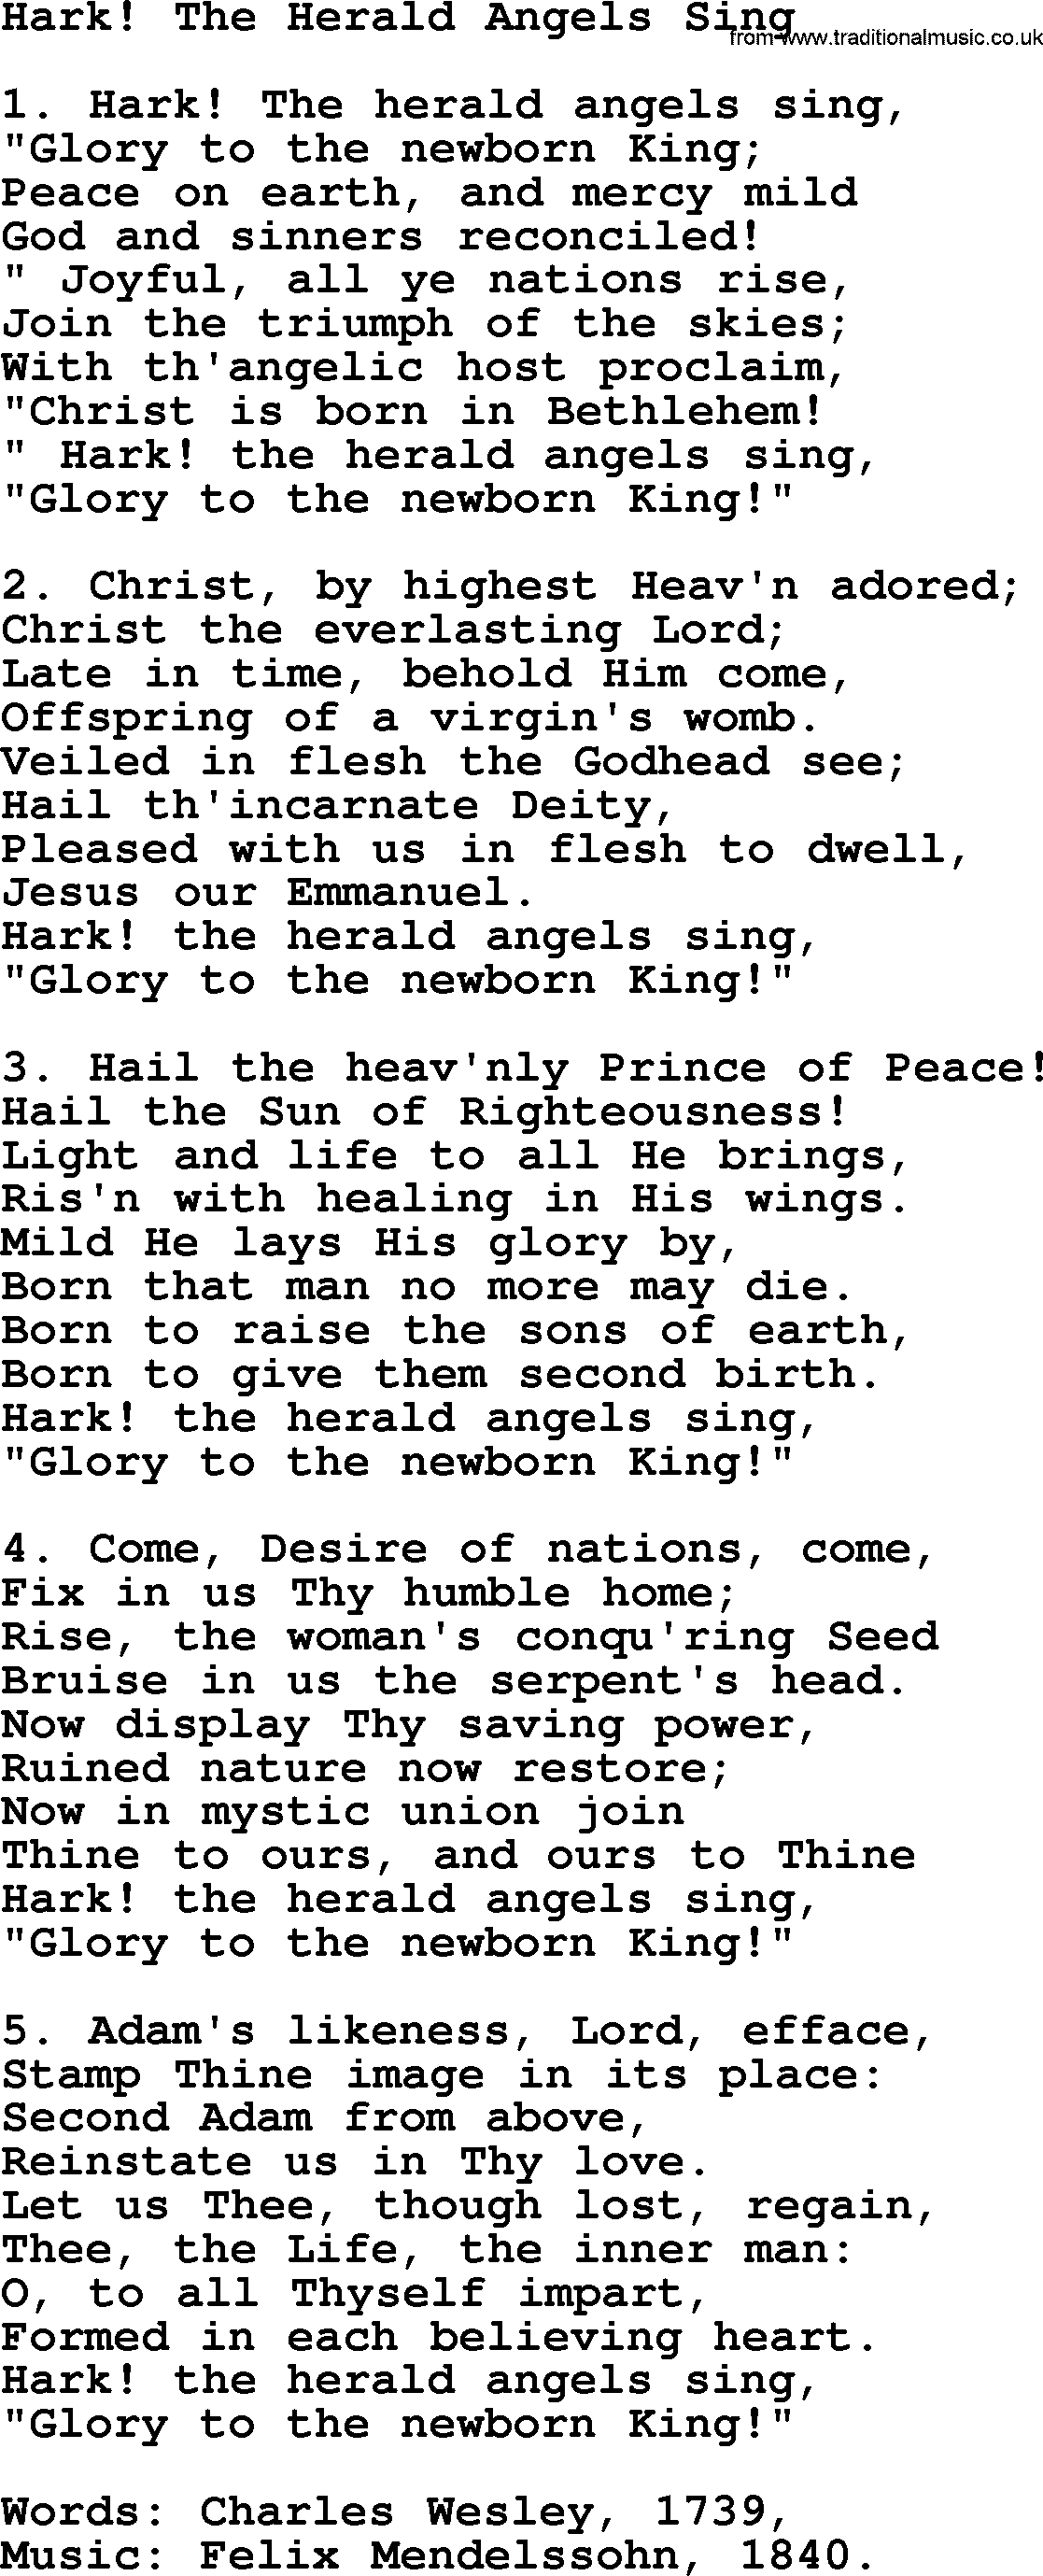 Christmas Powerpoints, Song: Hark The Herald Angels Sing - Lyrics, PPT(for church projection etc ...